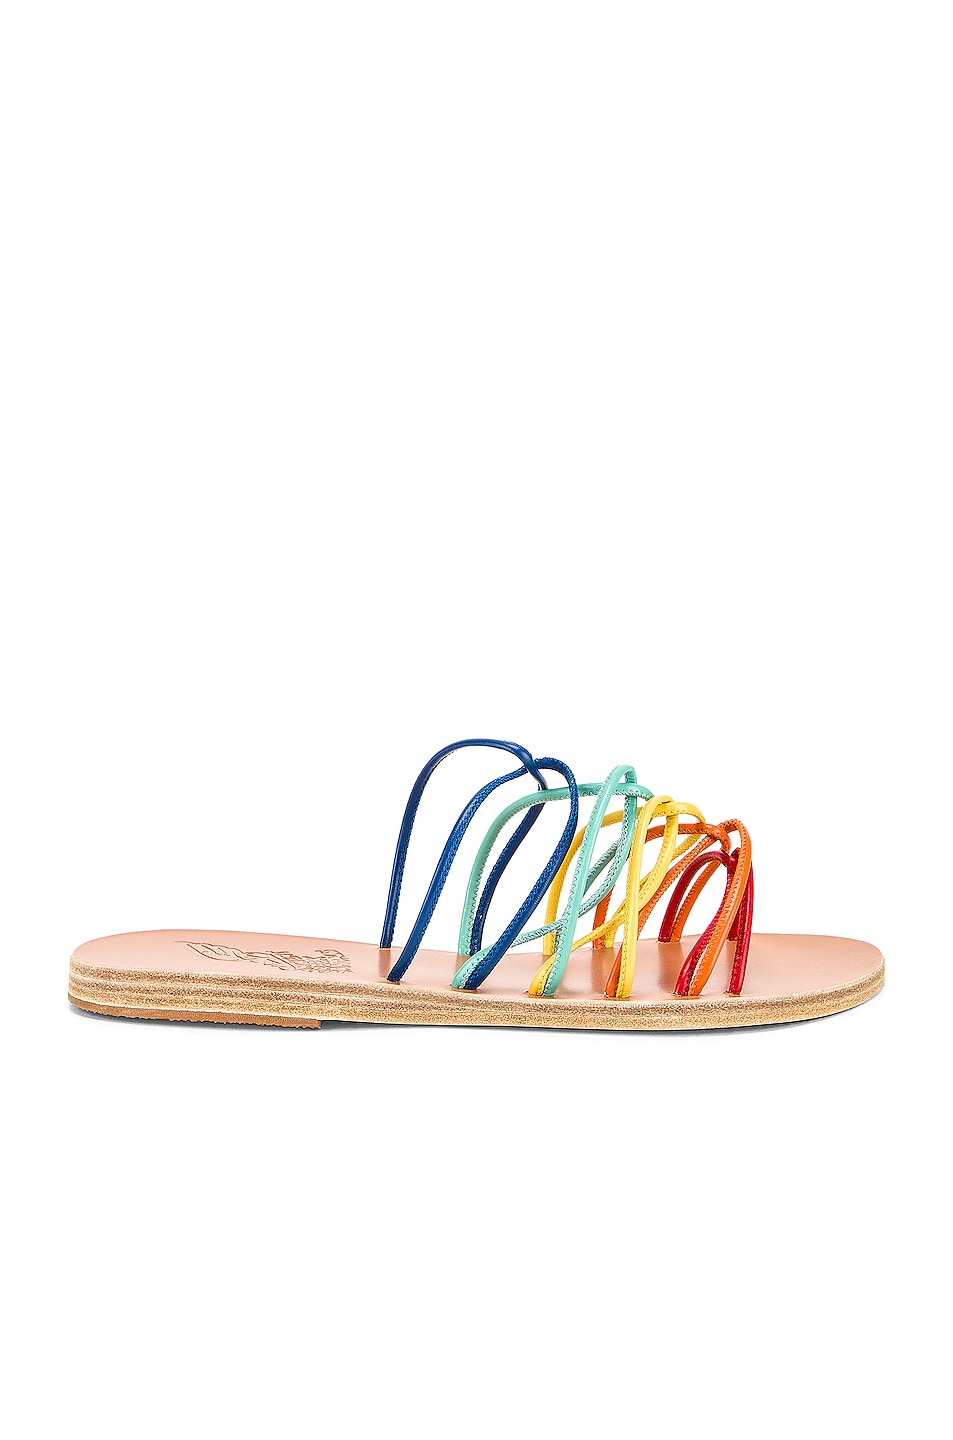 Image 1 of Ancient Greek Sandals Rodopi Sandals in Multi Bright